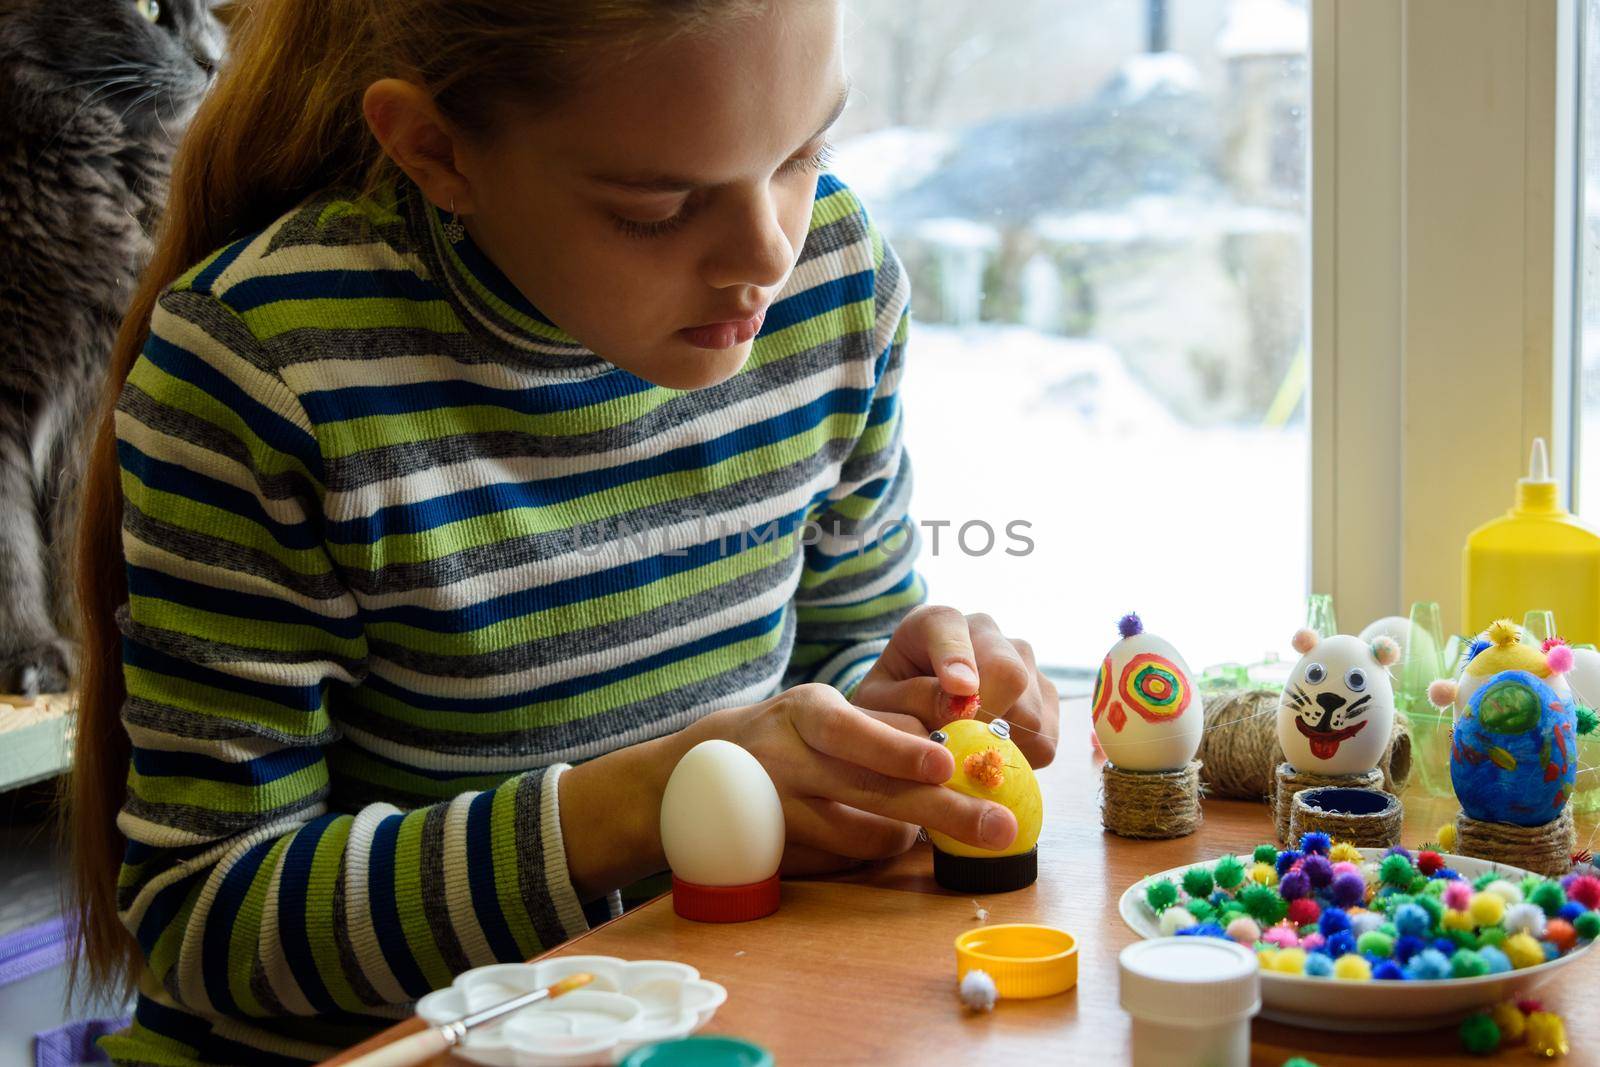 A girl sits at a table by the window and paints Easter eggs with a brush and paints